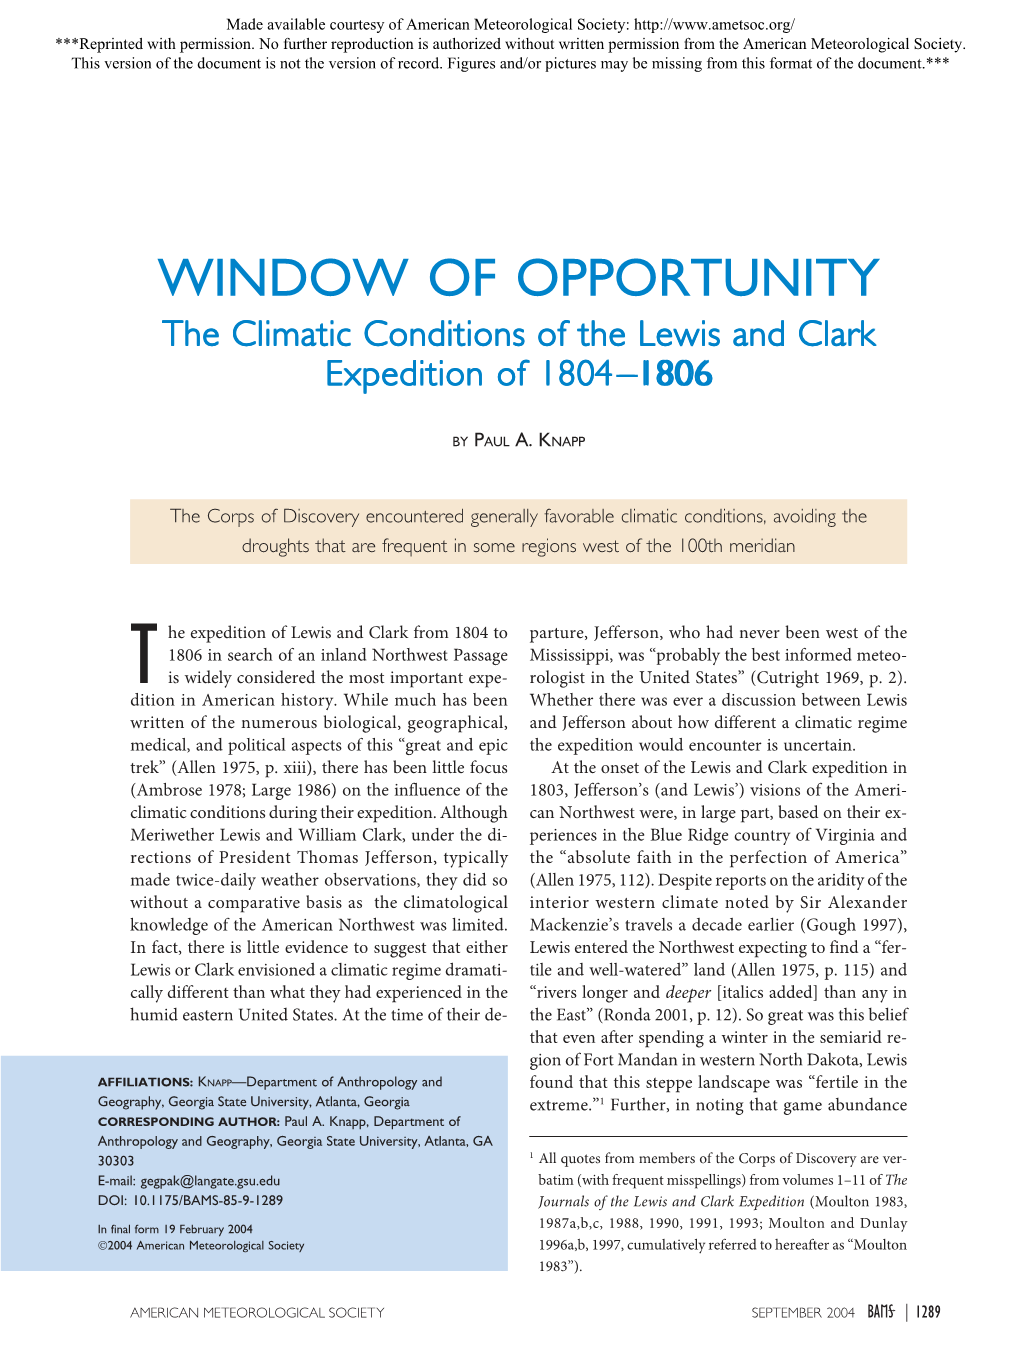 Window of Opportunity: the Climatic Conditions of the Lewis And